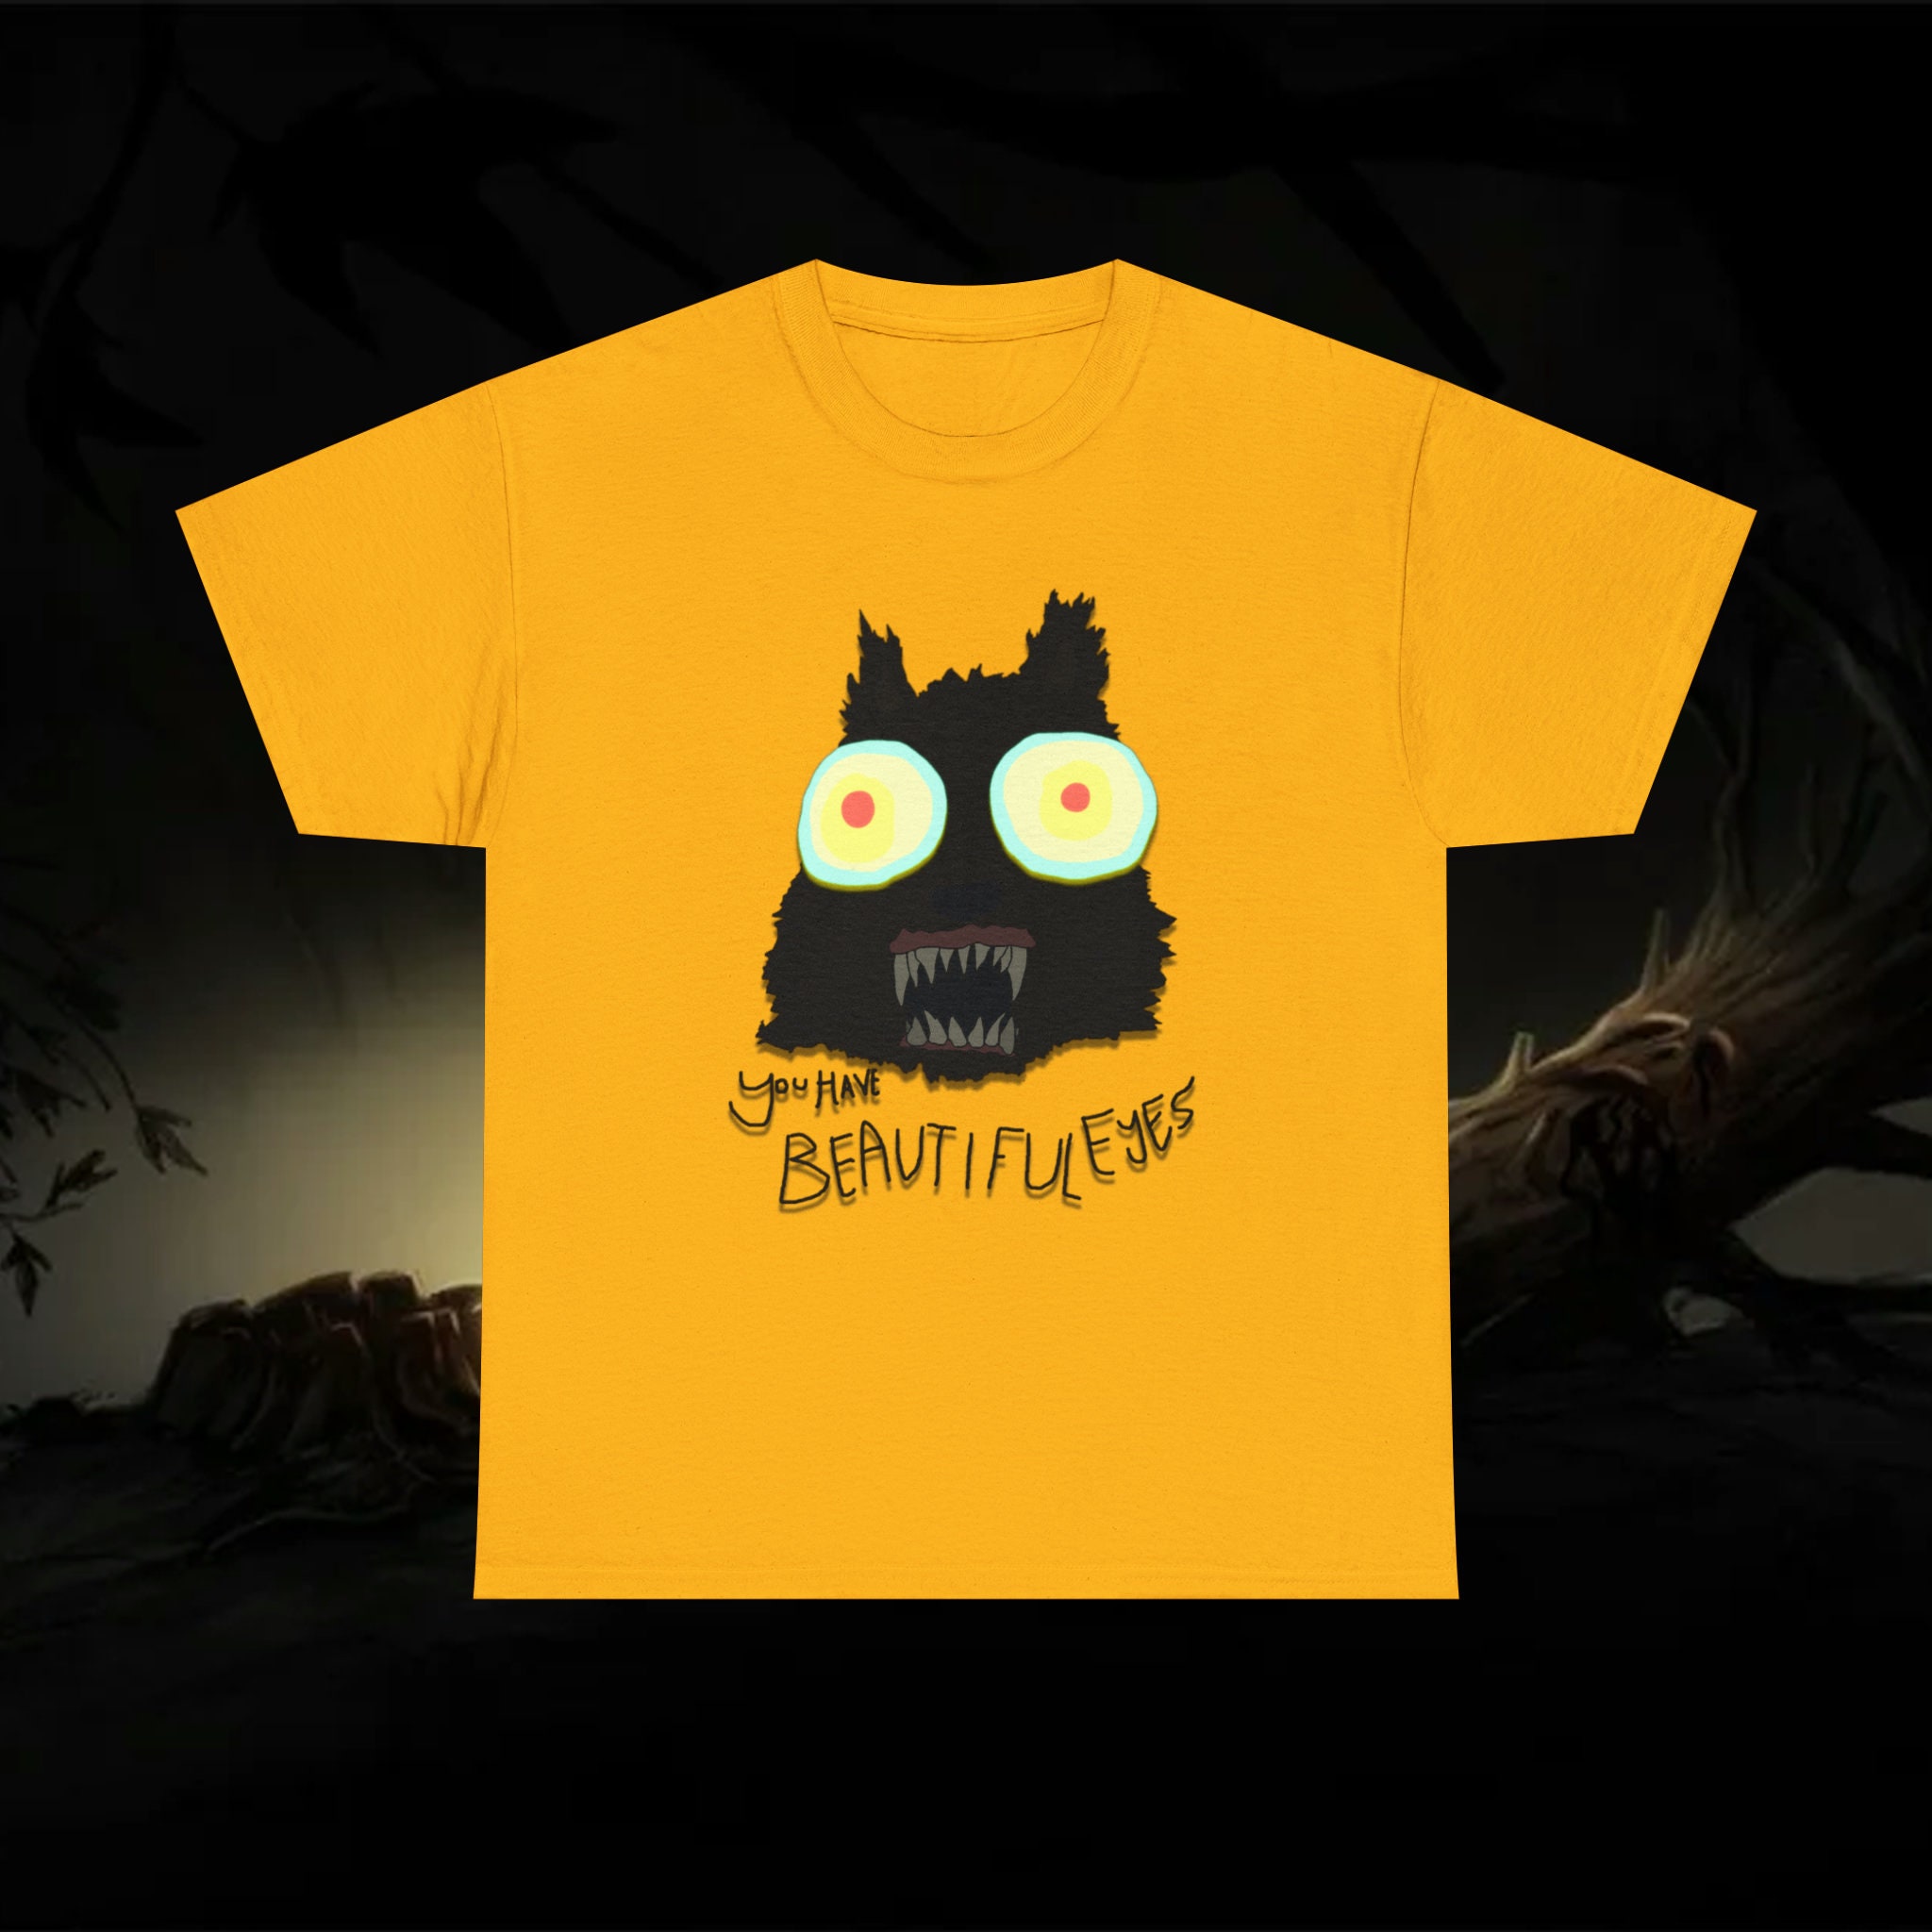 You Have Beautiful Eyes Over The Garden Wall Shirt - Peanutstee